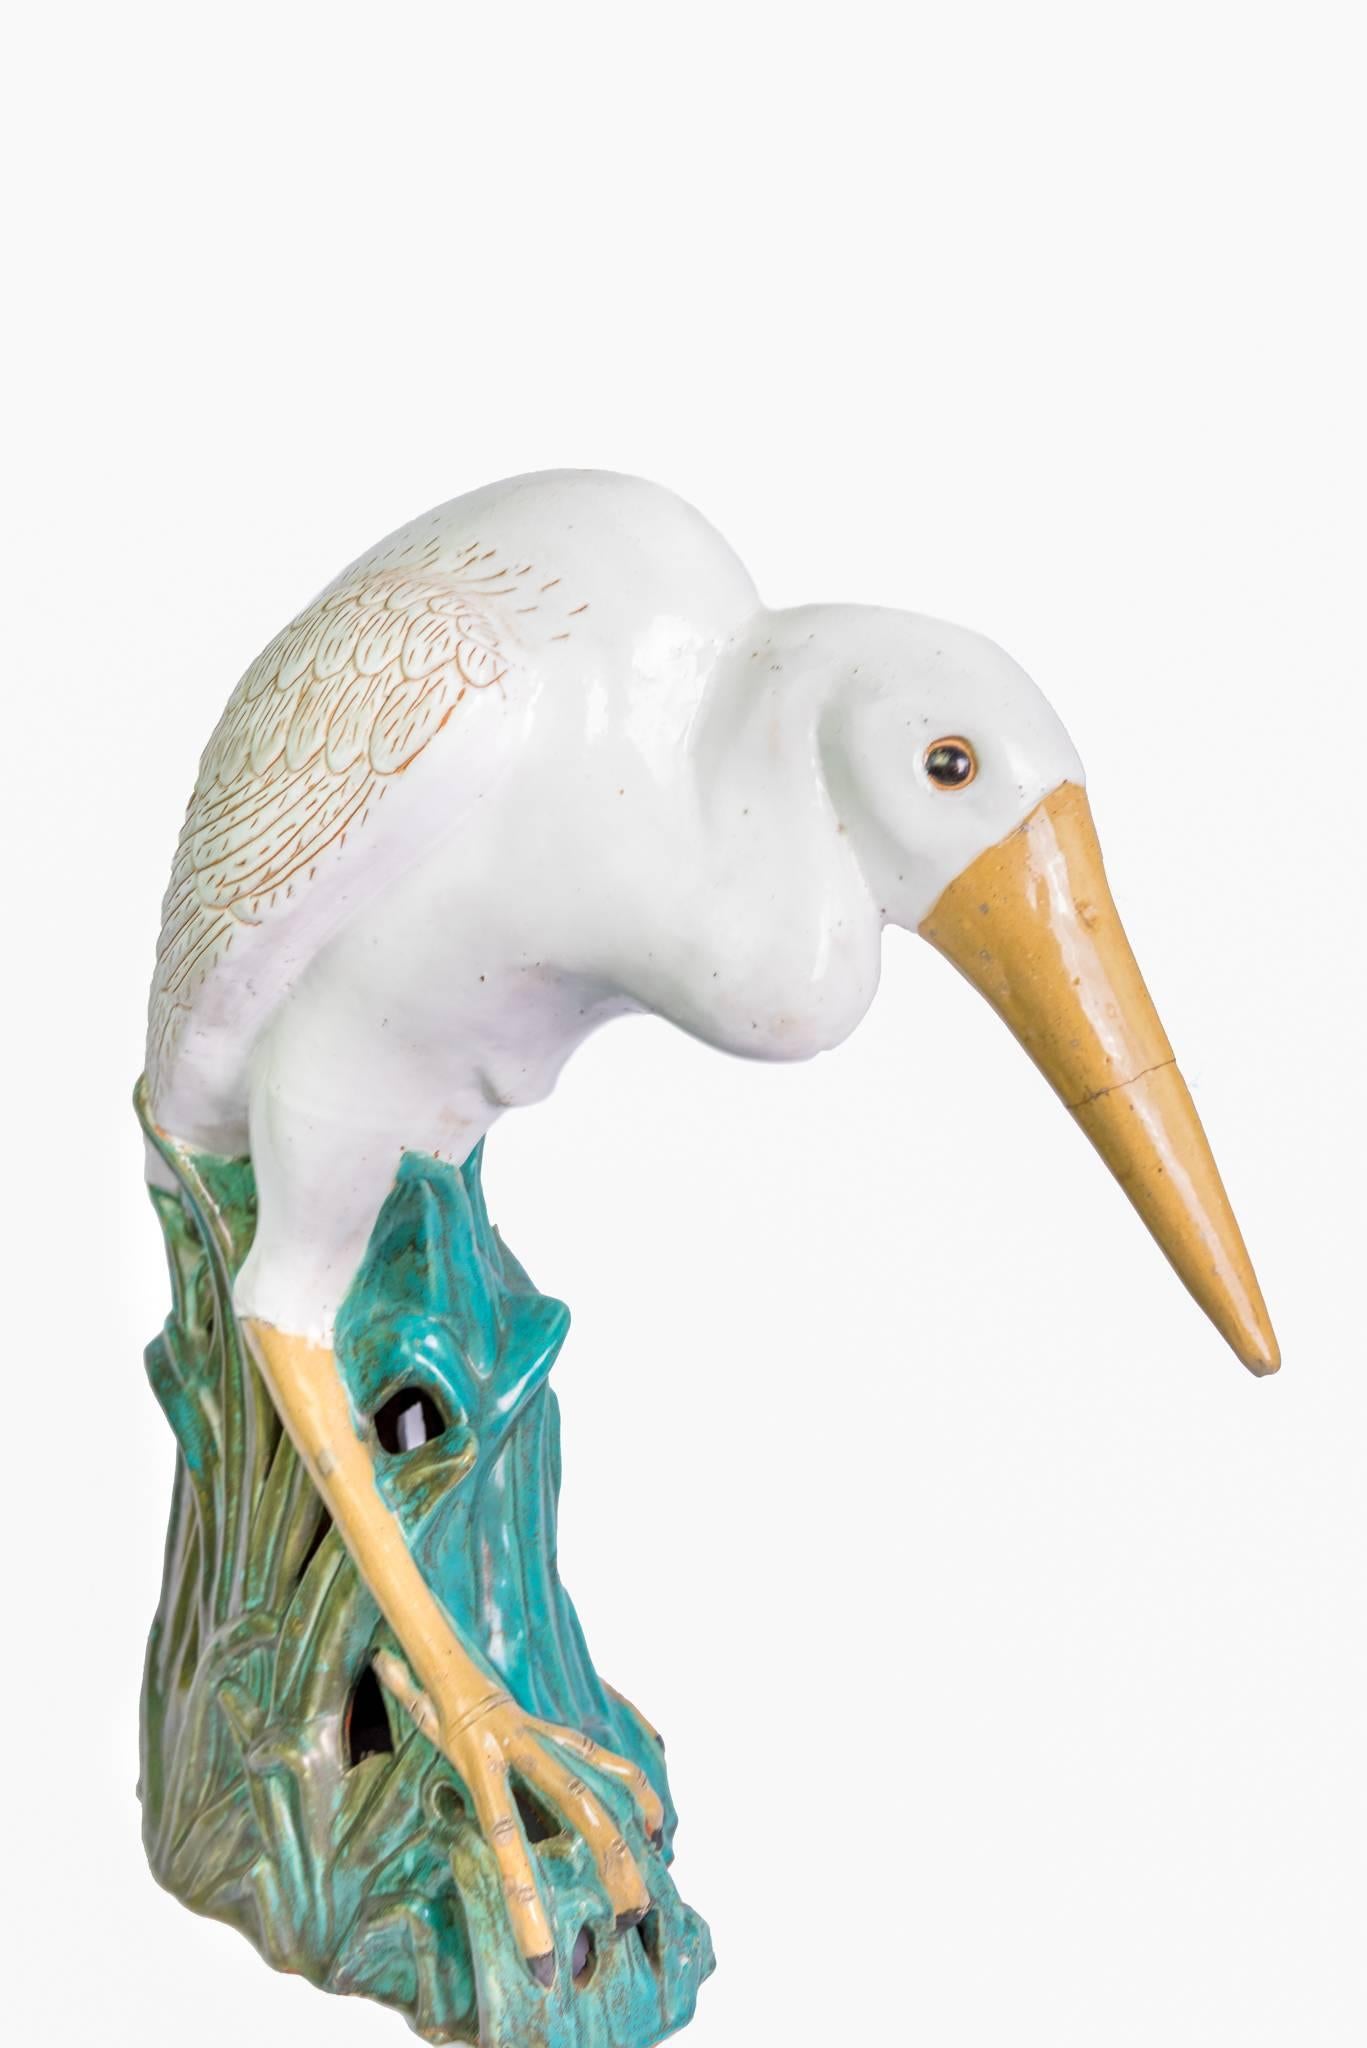 Glazed ceramic herons in the French Colonial style depicted as if they were standing in water with water plants at their feet.